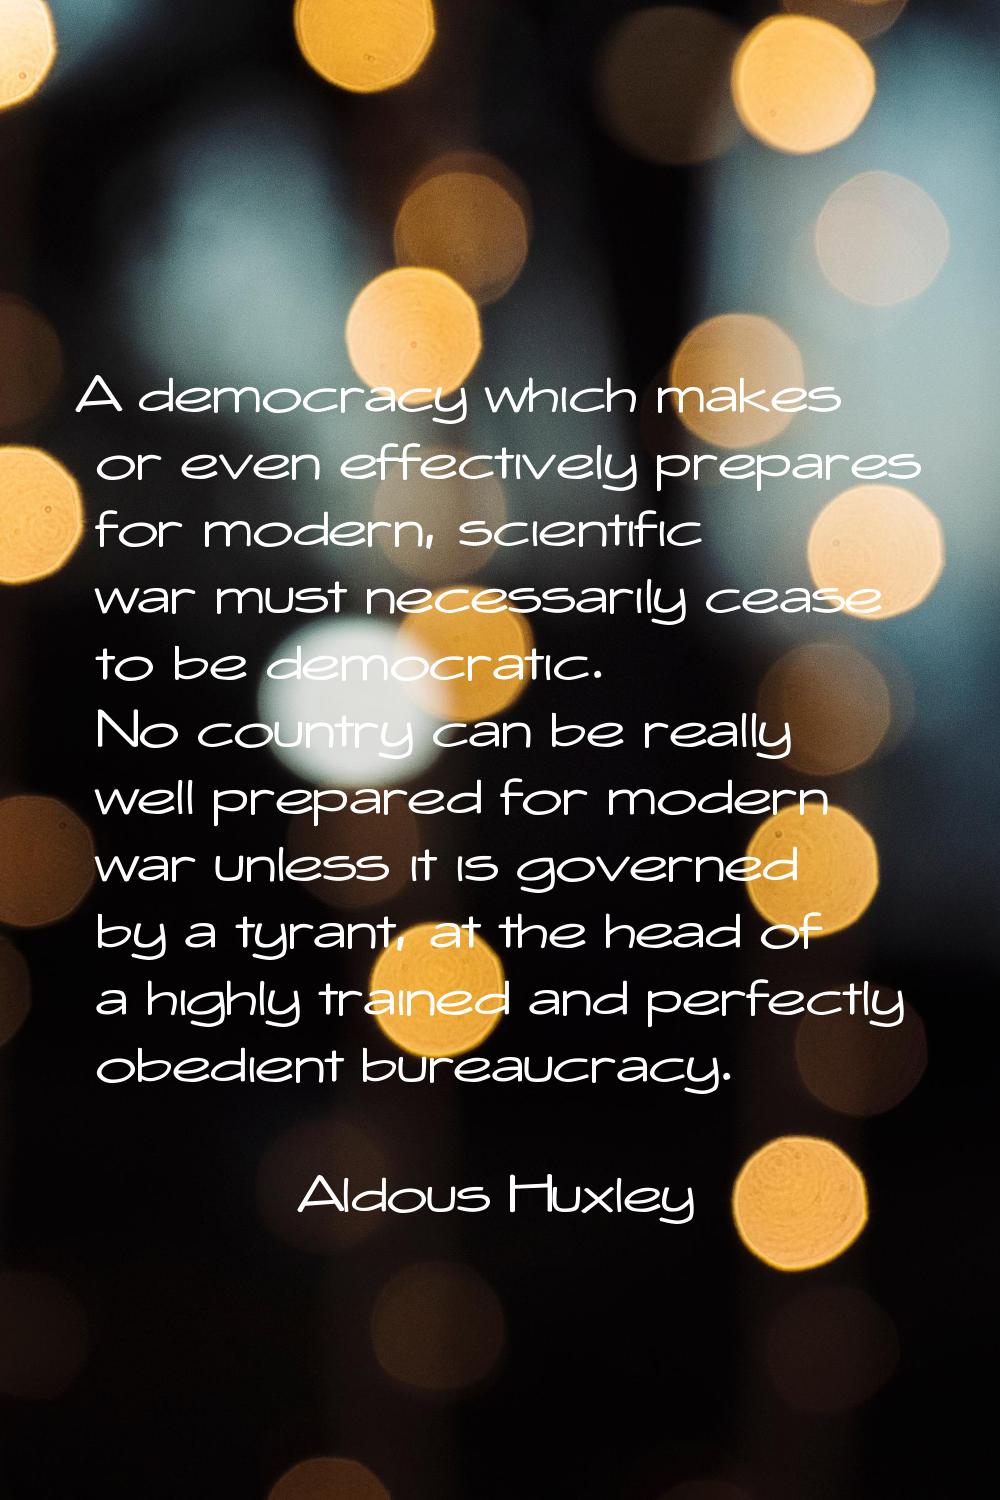 A democracy which makes or even effectively prepares for modern, scientific war must necessarily ce